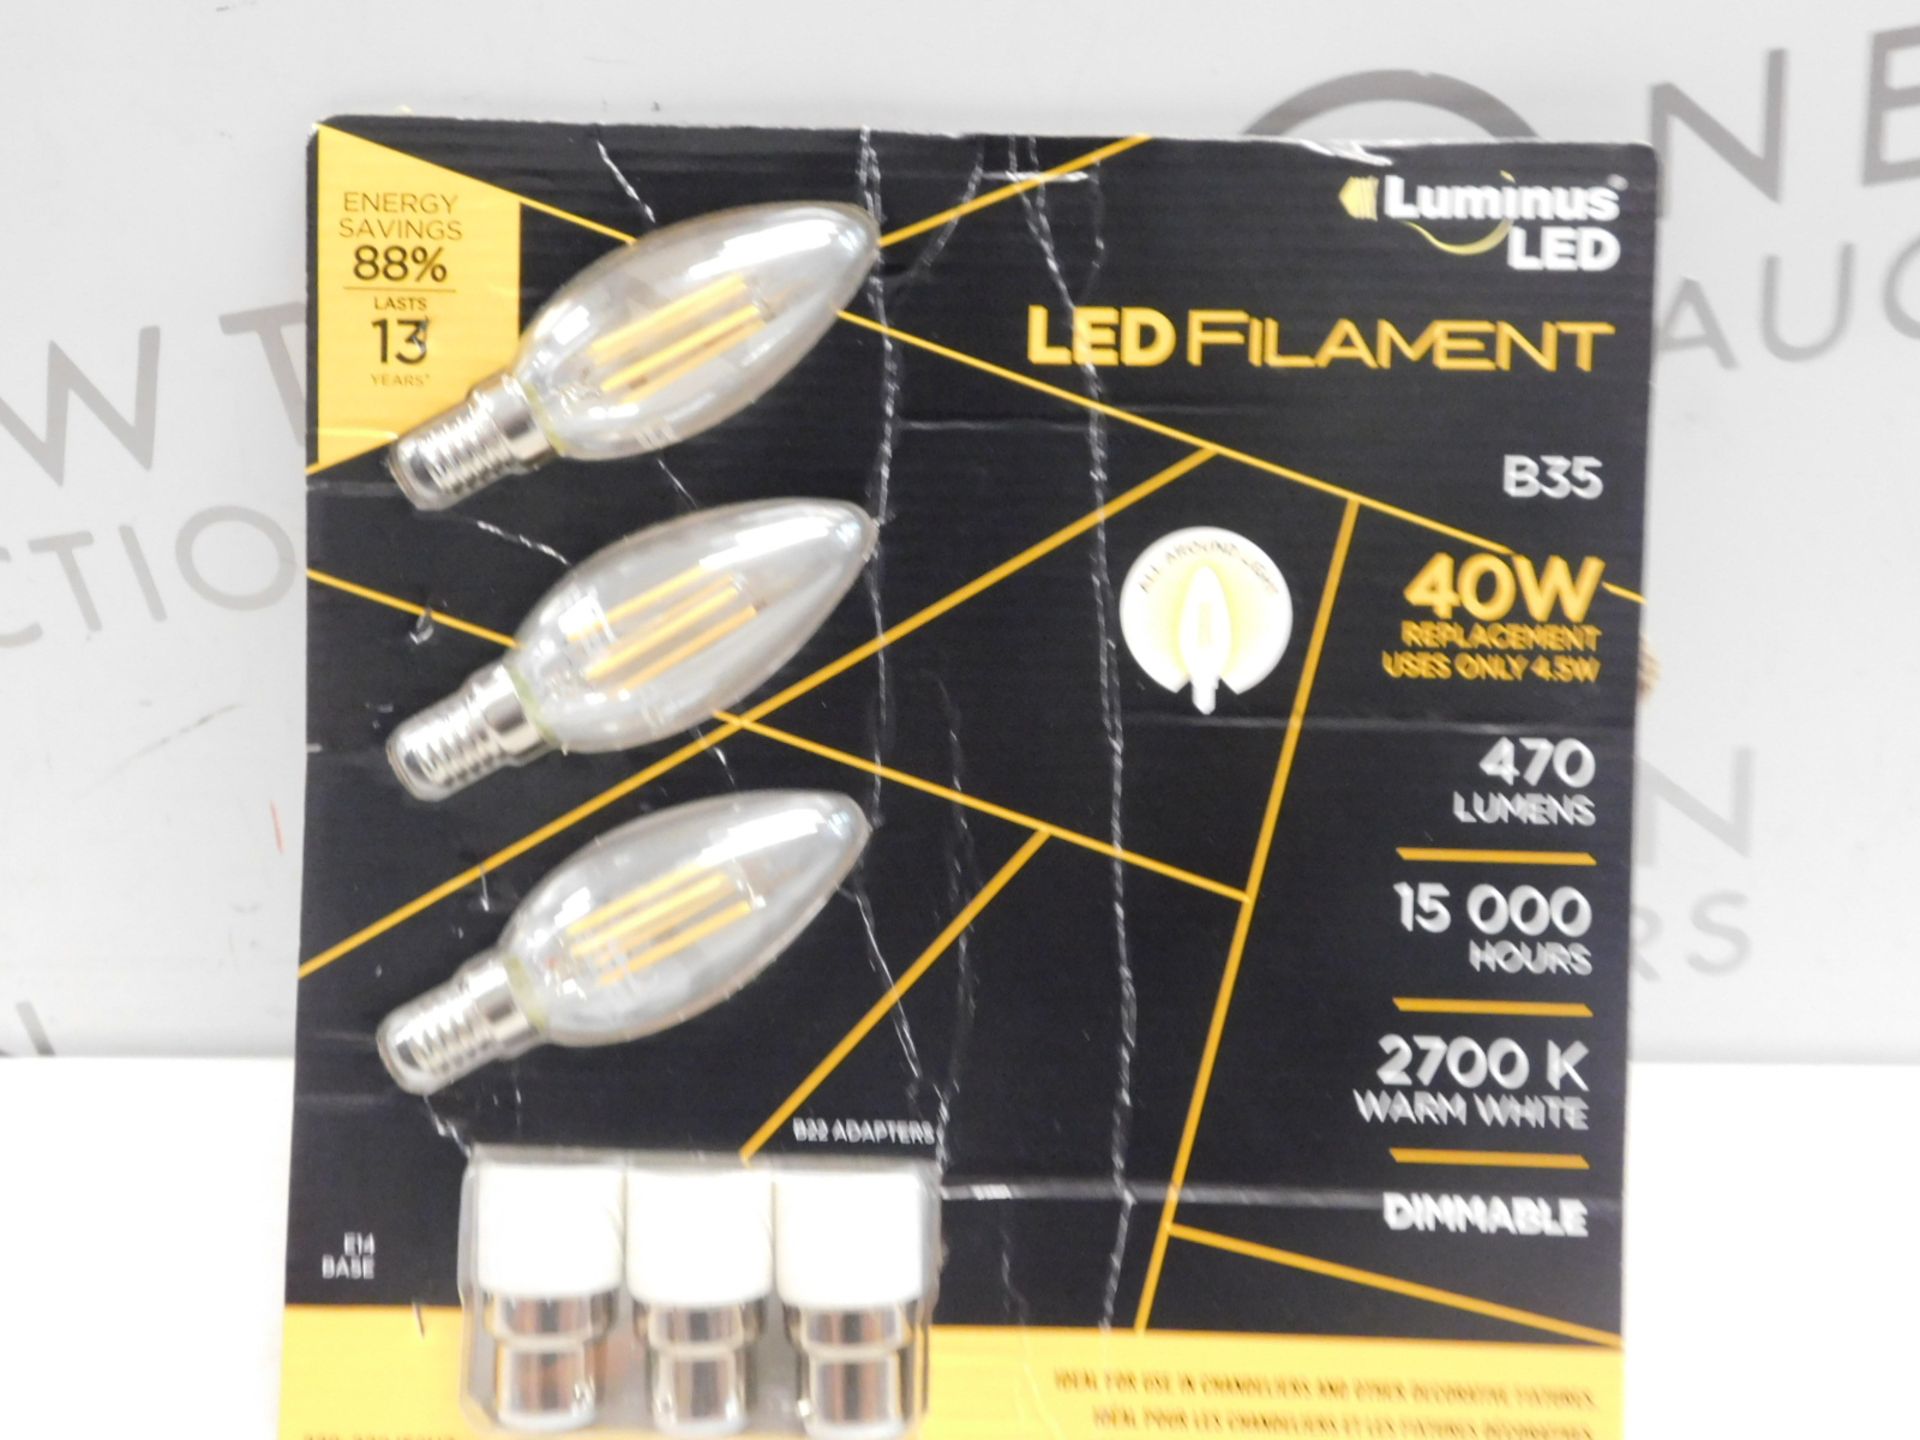 1 PACK OF 3 LED FILAMENT B35 BULBS WITH B22 ADAPTERS RRP £19.99